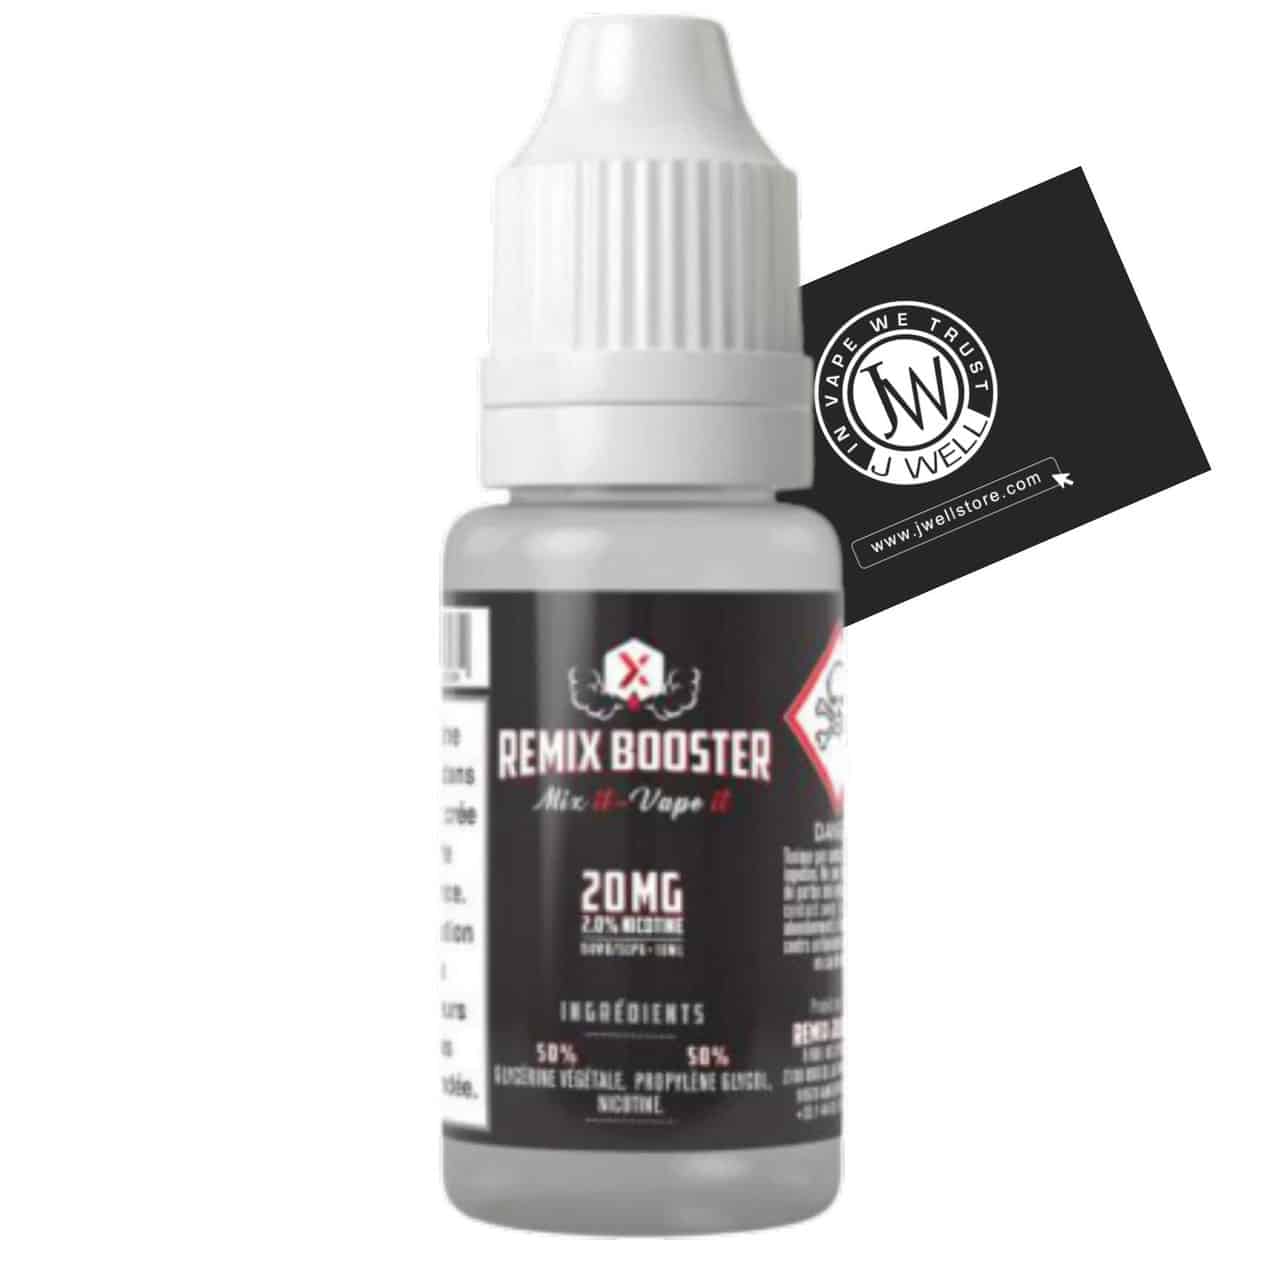 Booster de Nicotine Remix Booster - J WELL